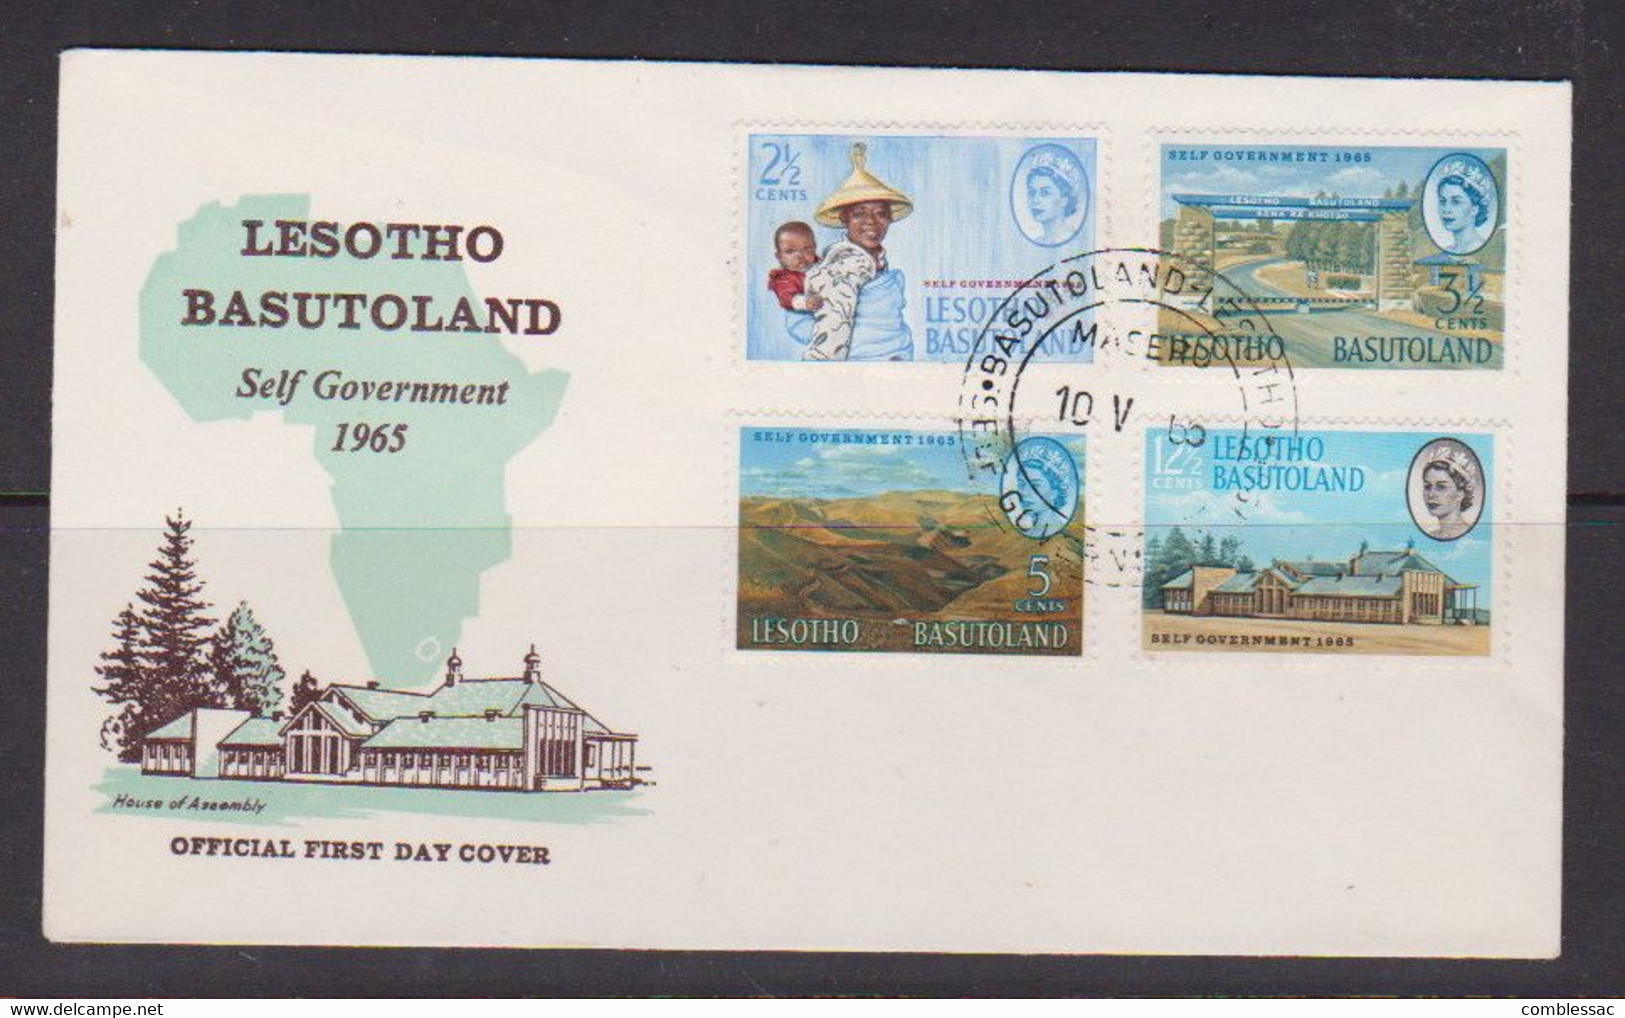 BASUTOLAND    1965    FIRST  DAY  COVER    Self  Government - 1965-1966 Self Government